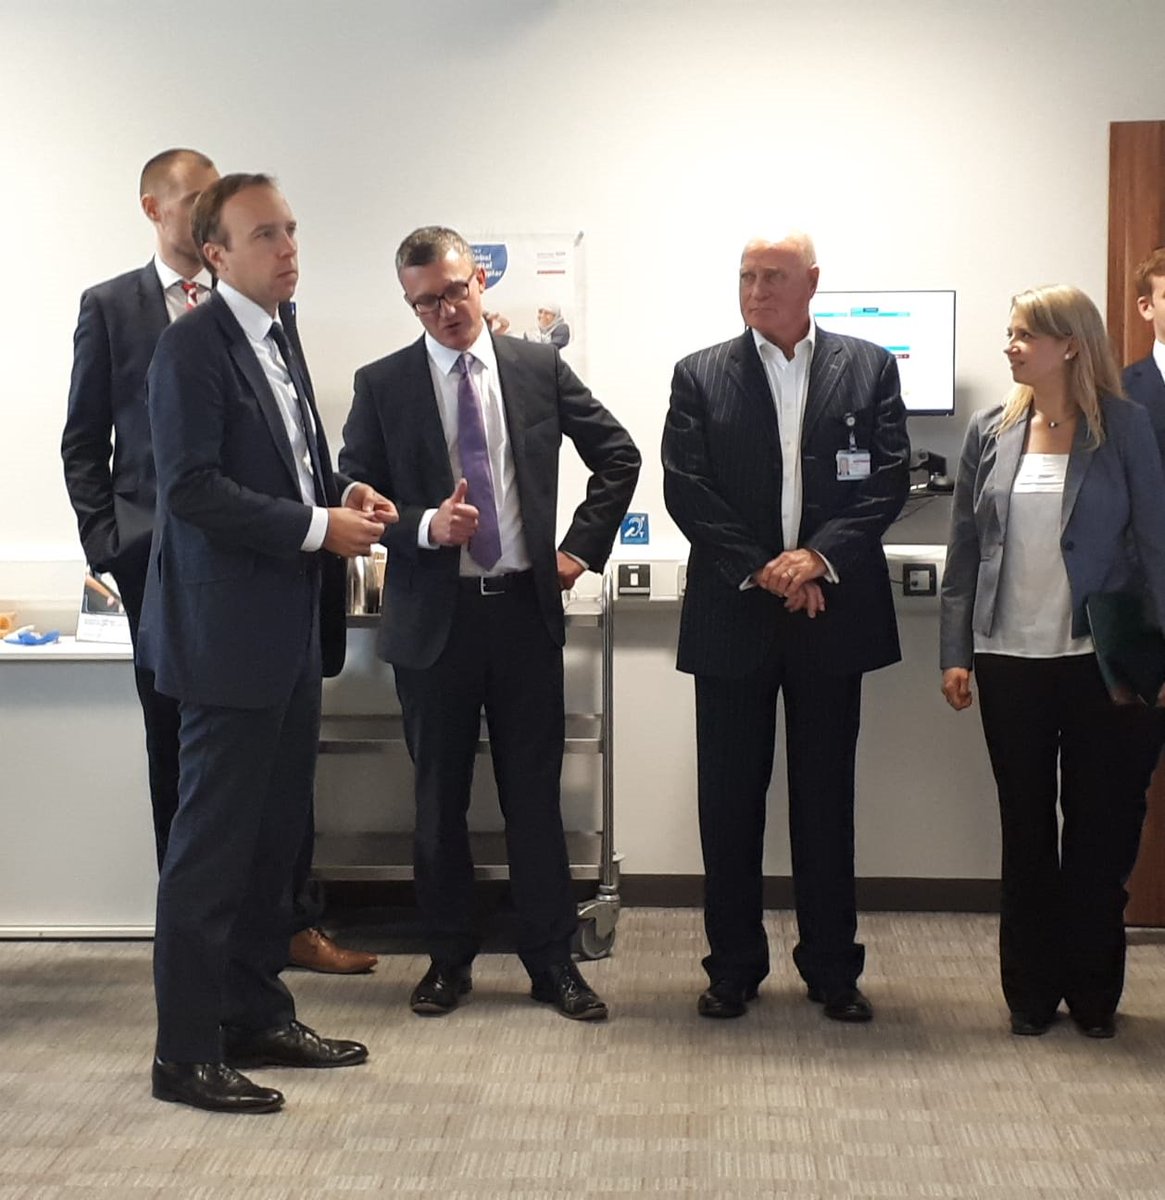 Thanks to @MattHancock for visiting today to see our innovative @SalfordGDE work in action and hearing about the pioneering technology benefitting our patients and staff.